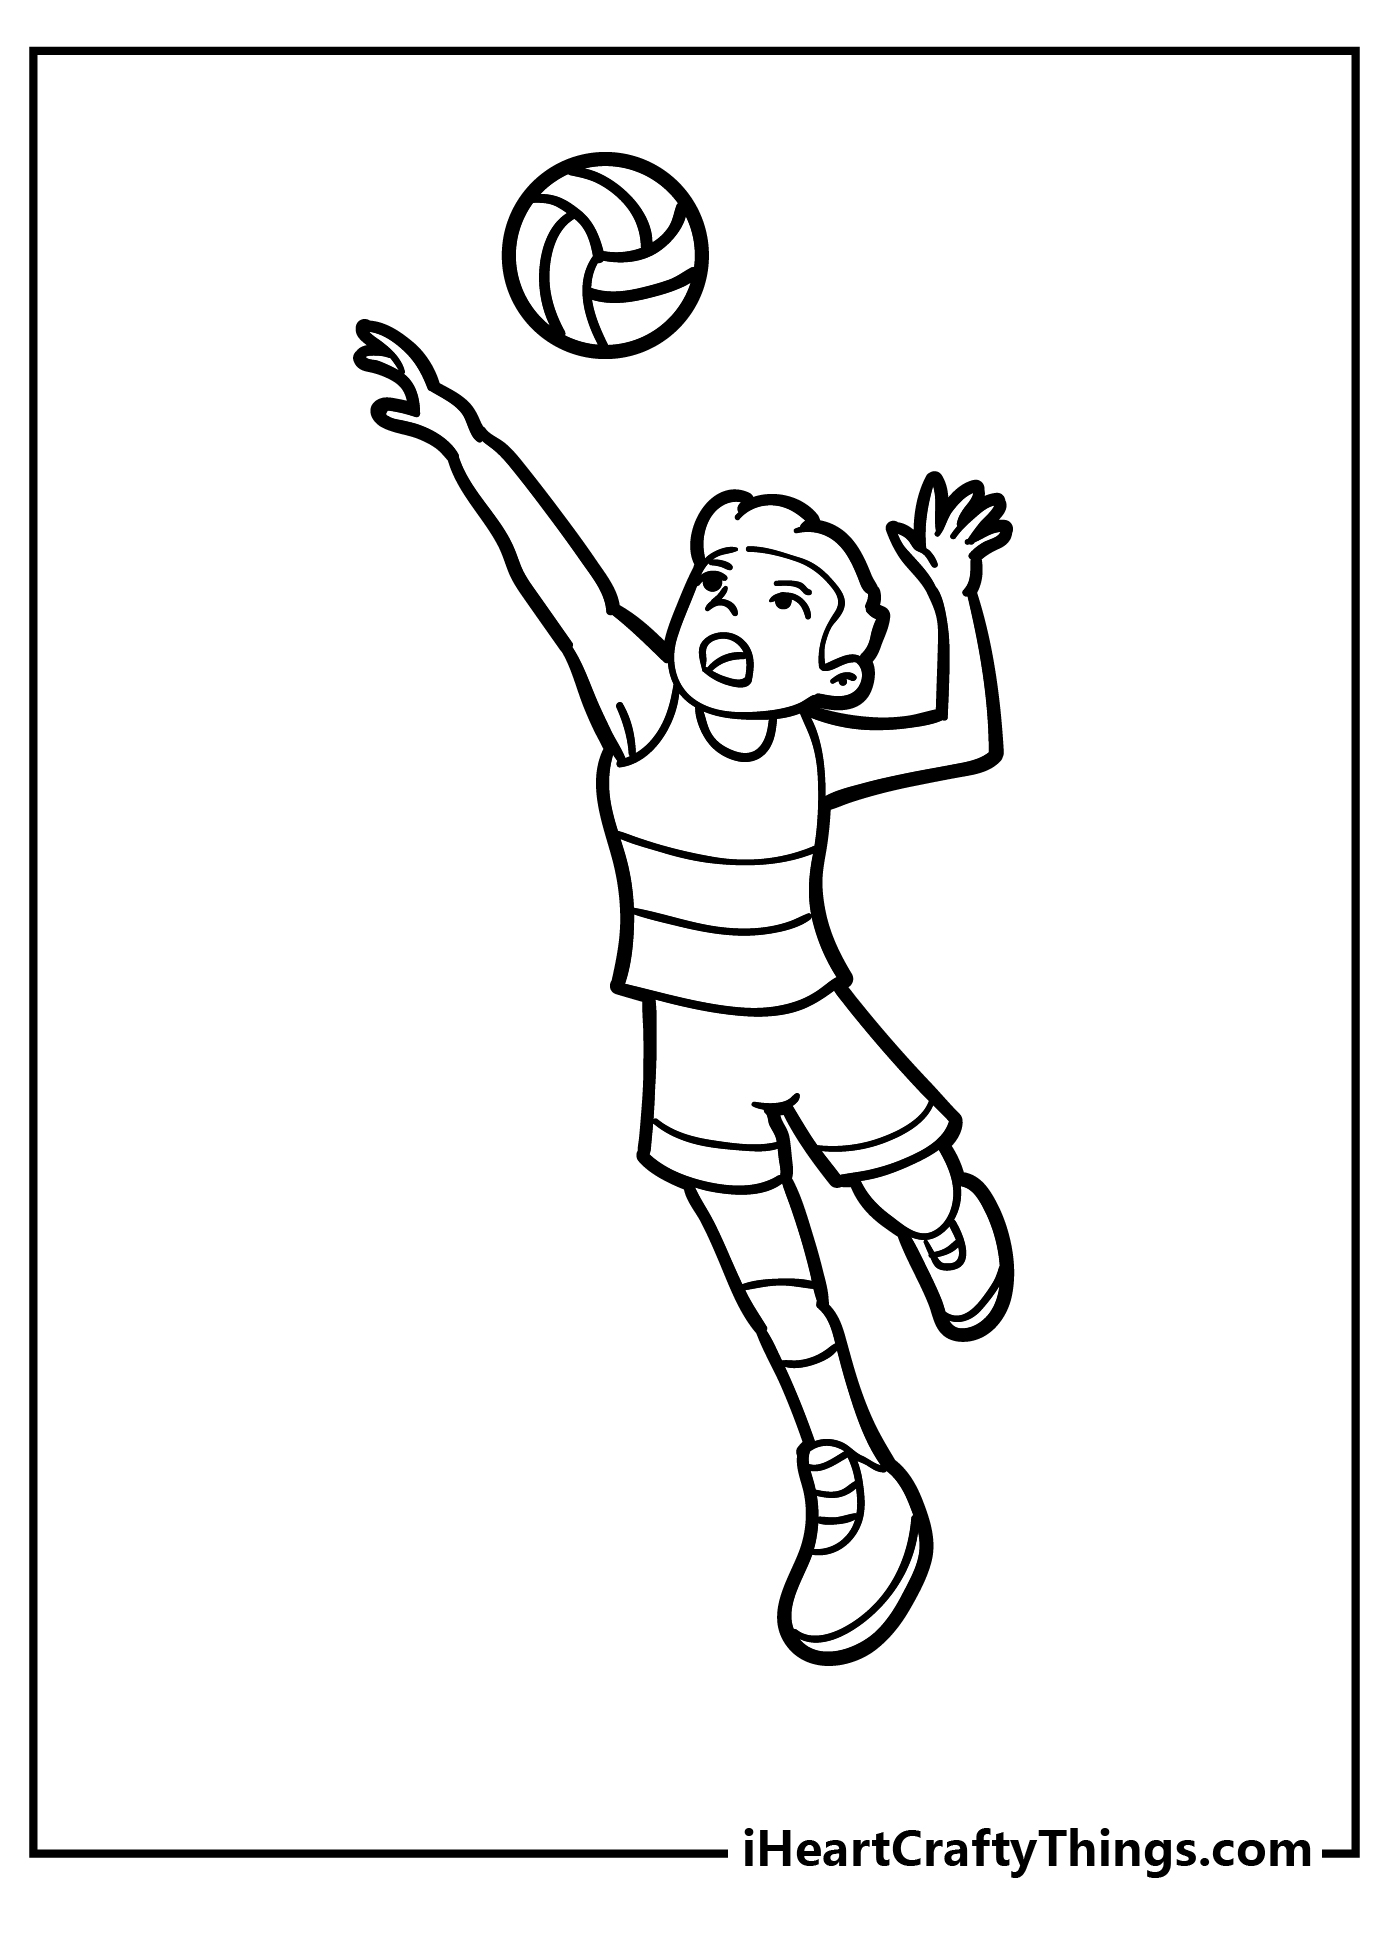 Volleyball Coloring Pages for preschoolers free printable